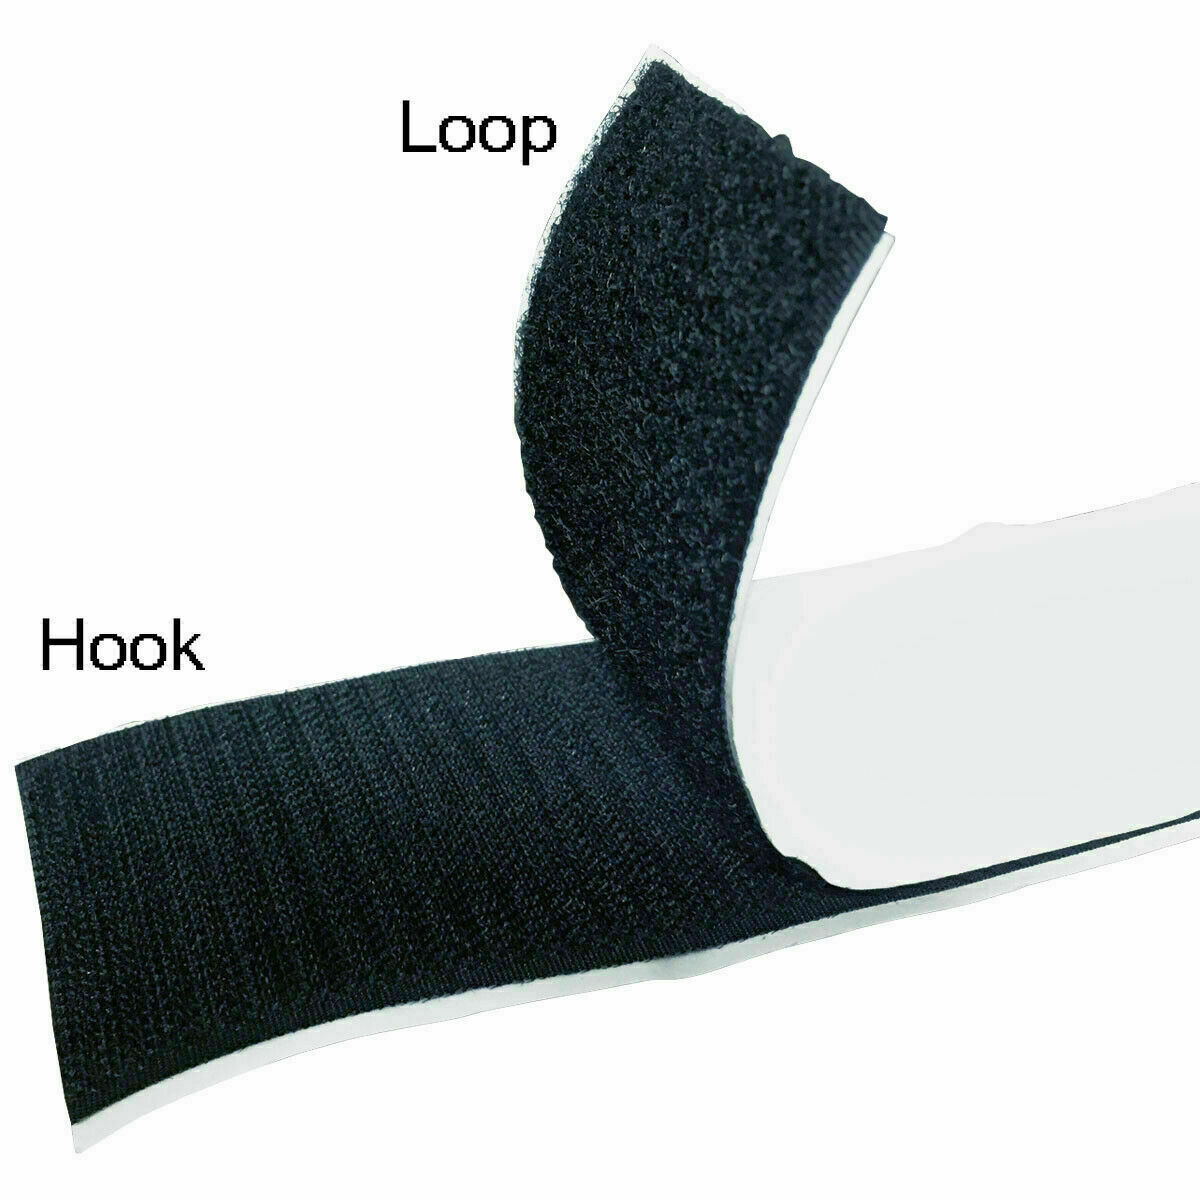 Hook And Loop Sticky Adhesive Backed Tape - Widths: 1/2", 1", 2", 3", 4"